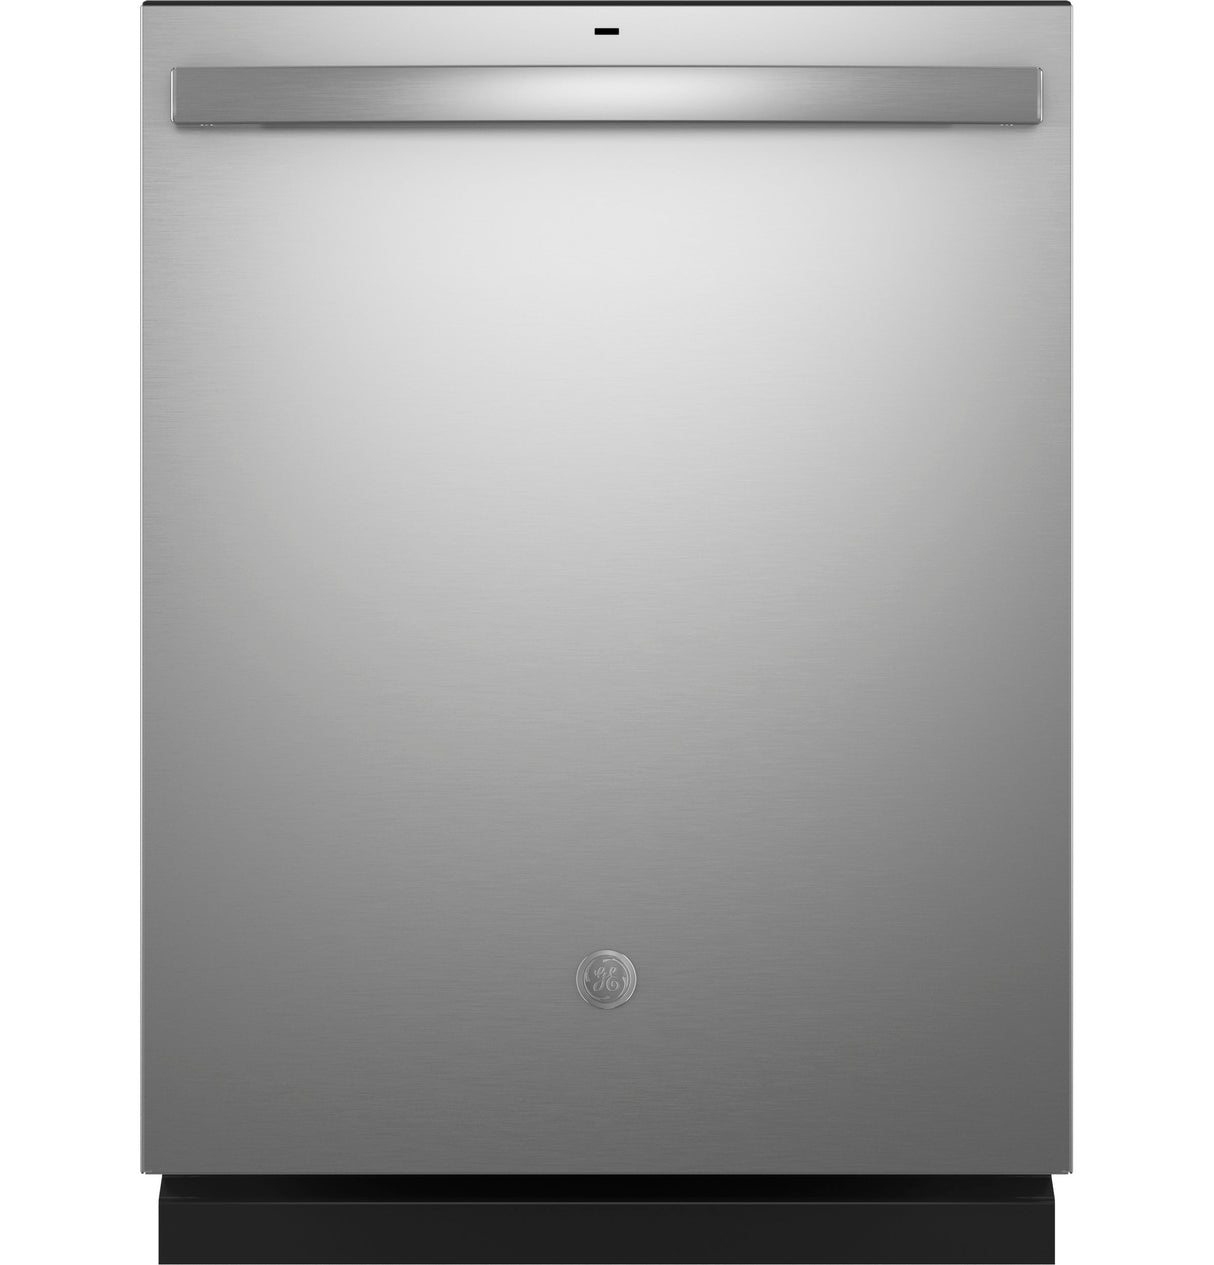 GE(R) ENERGY STAR(R) Top Control with Plastic Interior Dishwasher with Sanitize Cycle & Dry Boost - (GDT535PSRSS)